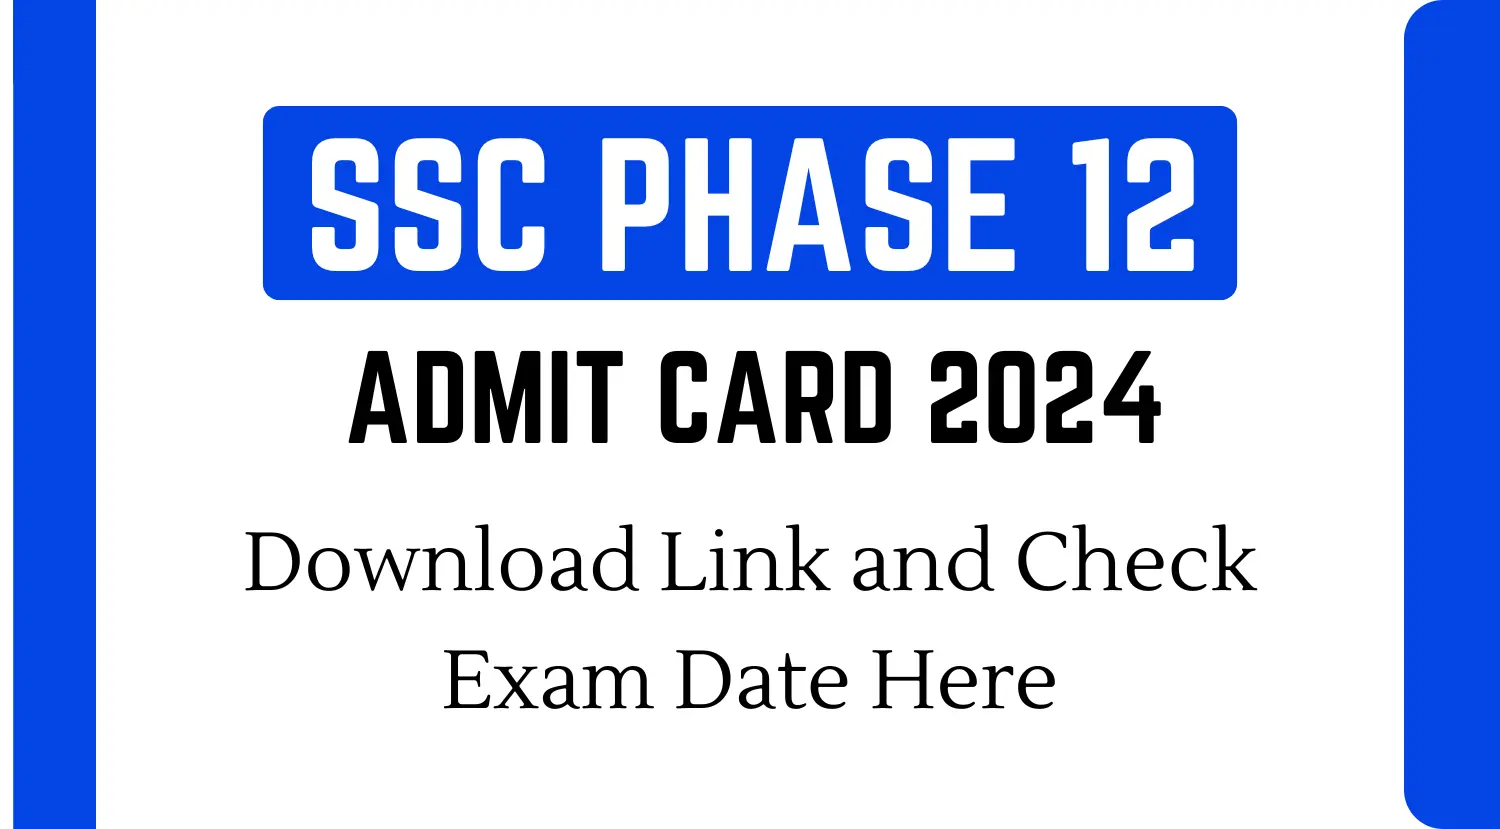 SSC Phase 12 Admit Card 2024 Download Link and Check Exam Date Here